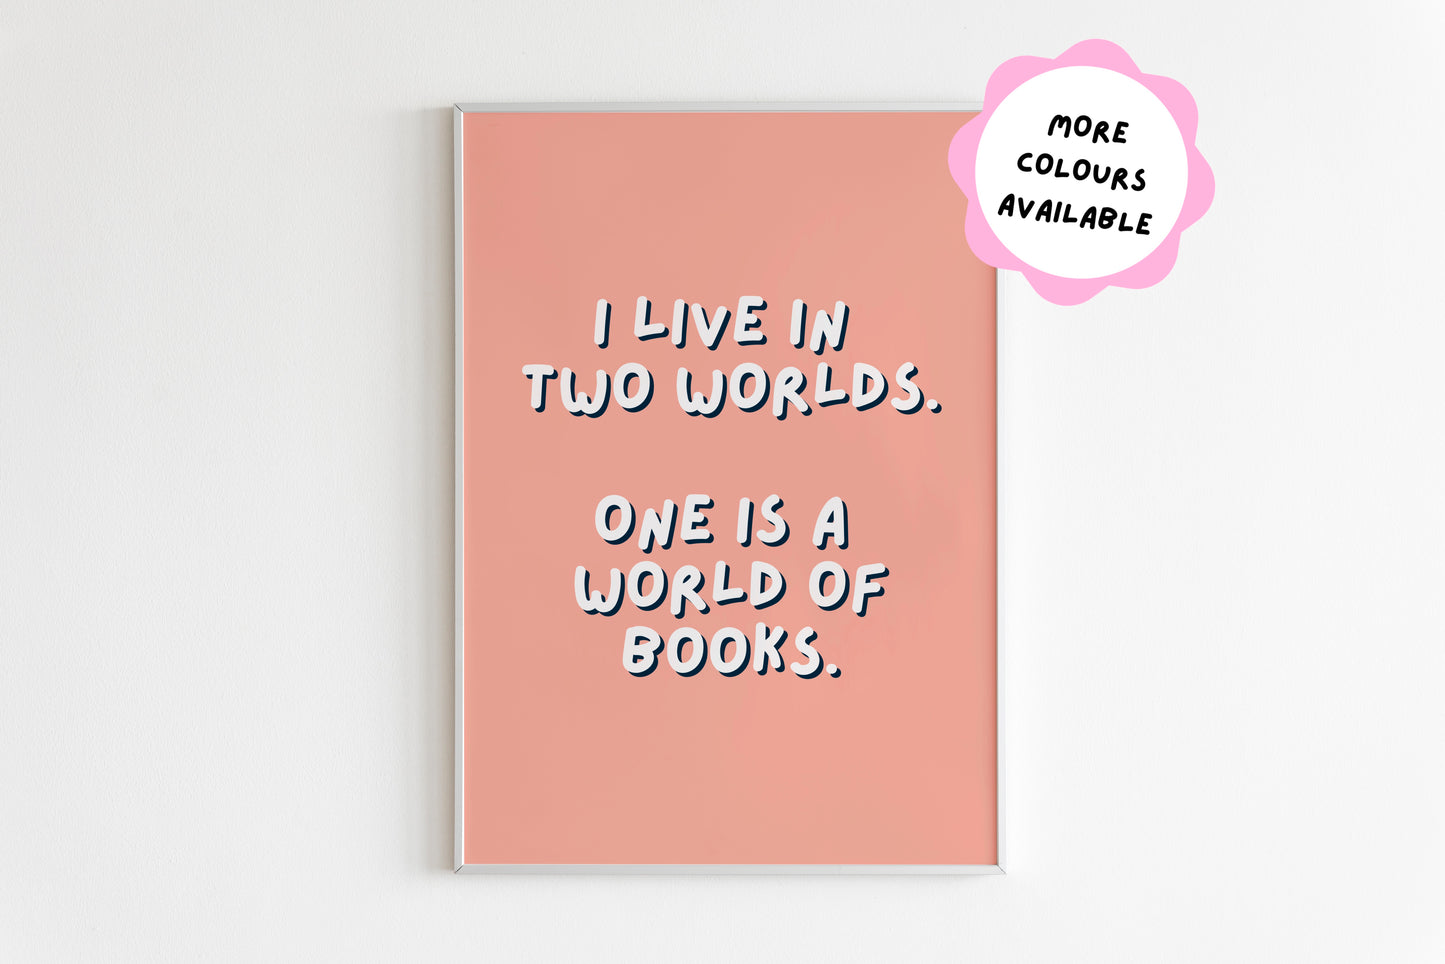 I Live In Two Worlds, One Is A World Of Books Print (Rory Gilmore - Gilmore Girls)